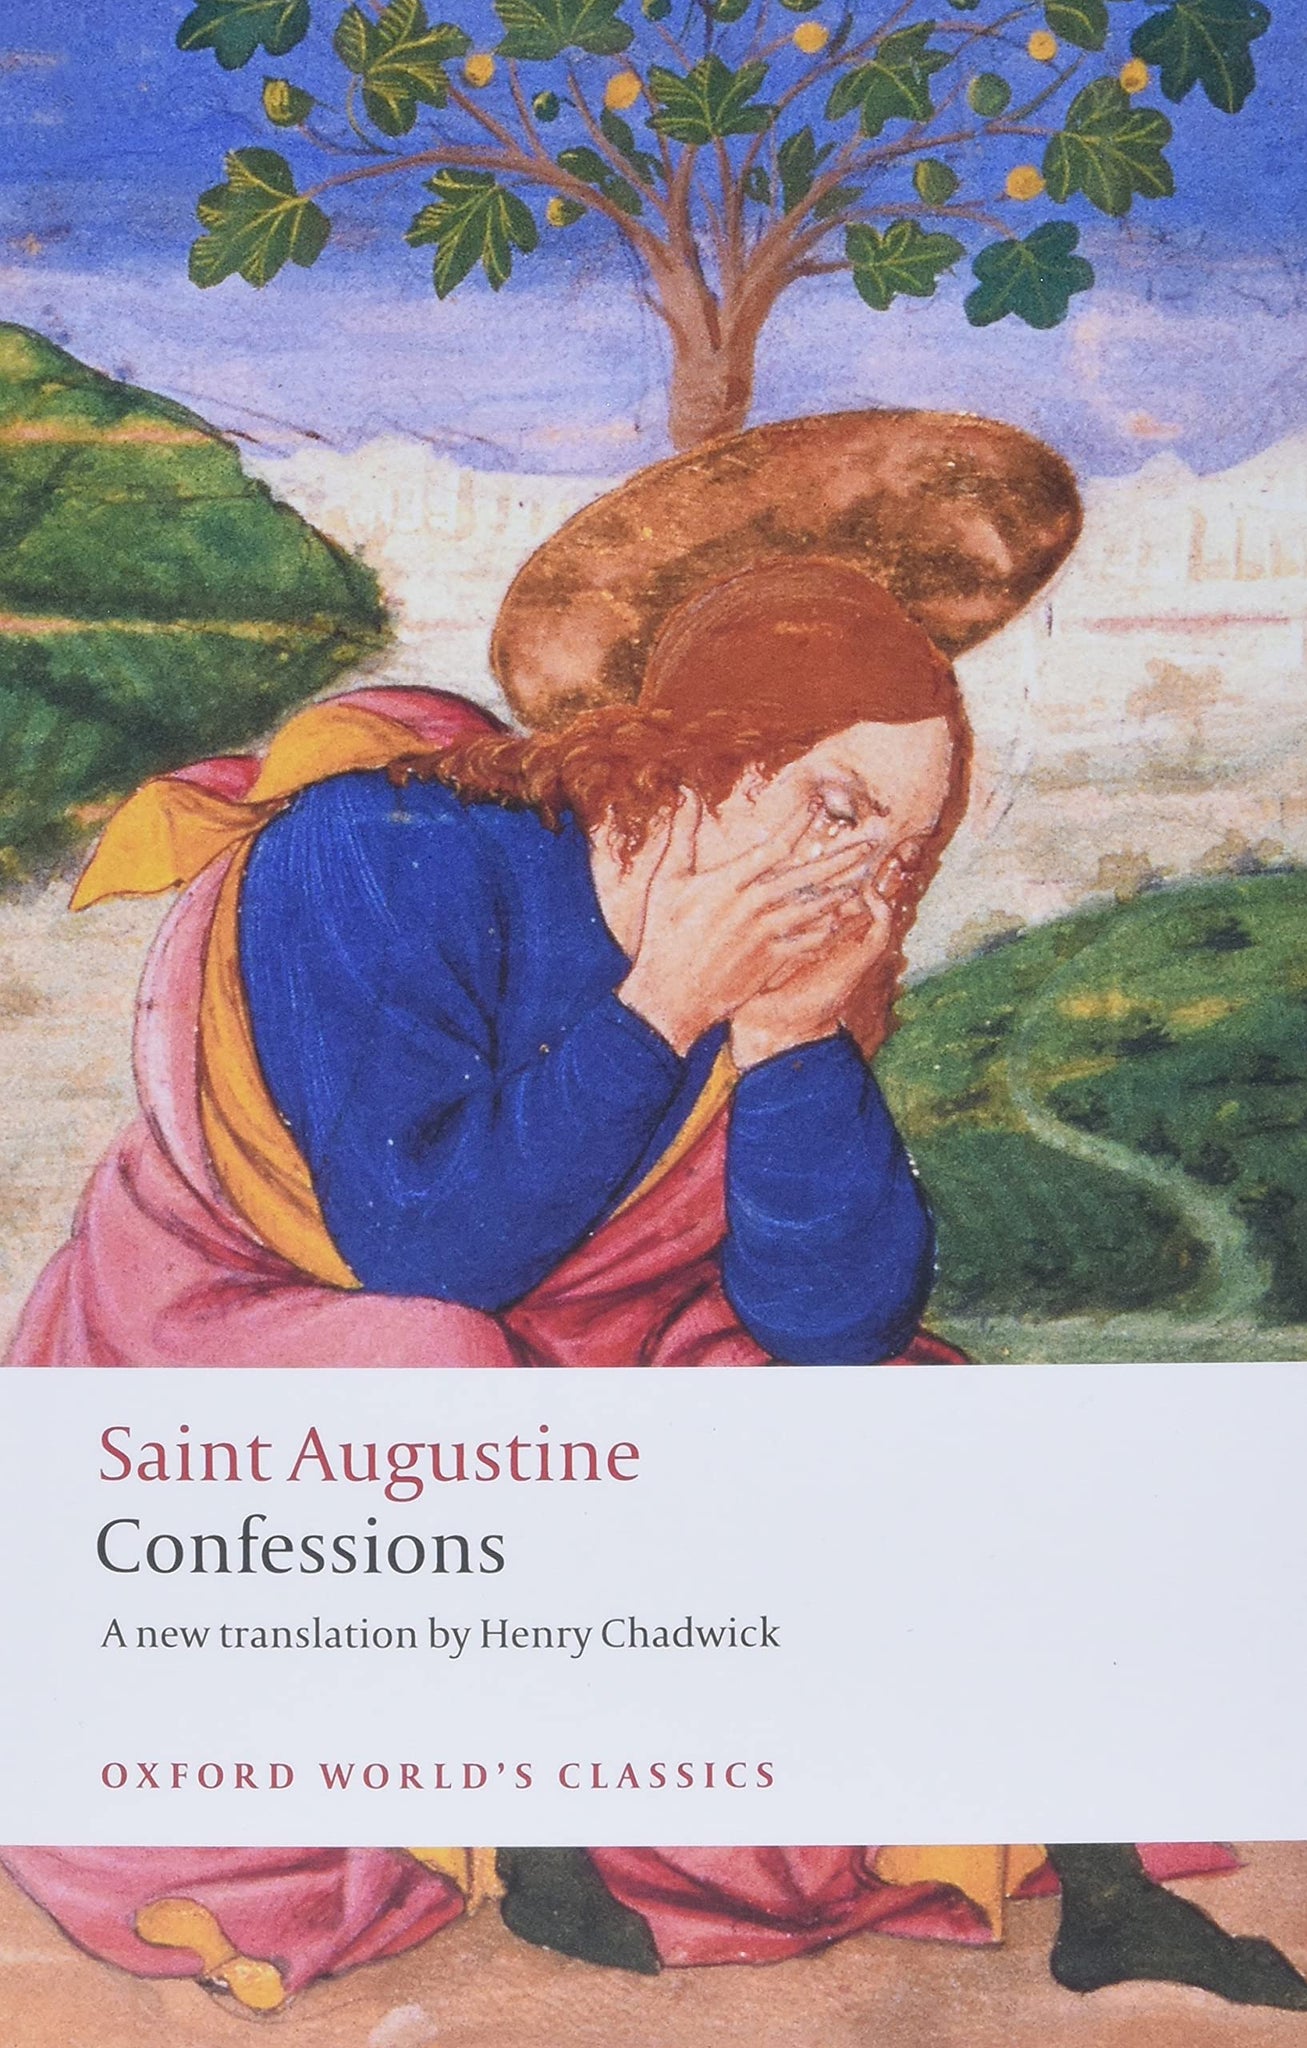 St. Augustine's Confessions by Saint Augustine (Oxford)